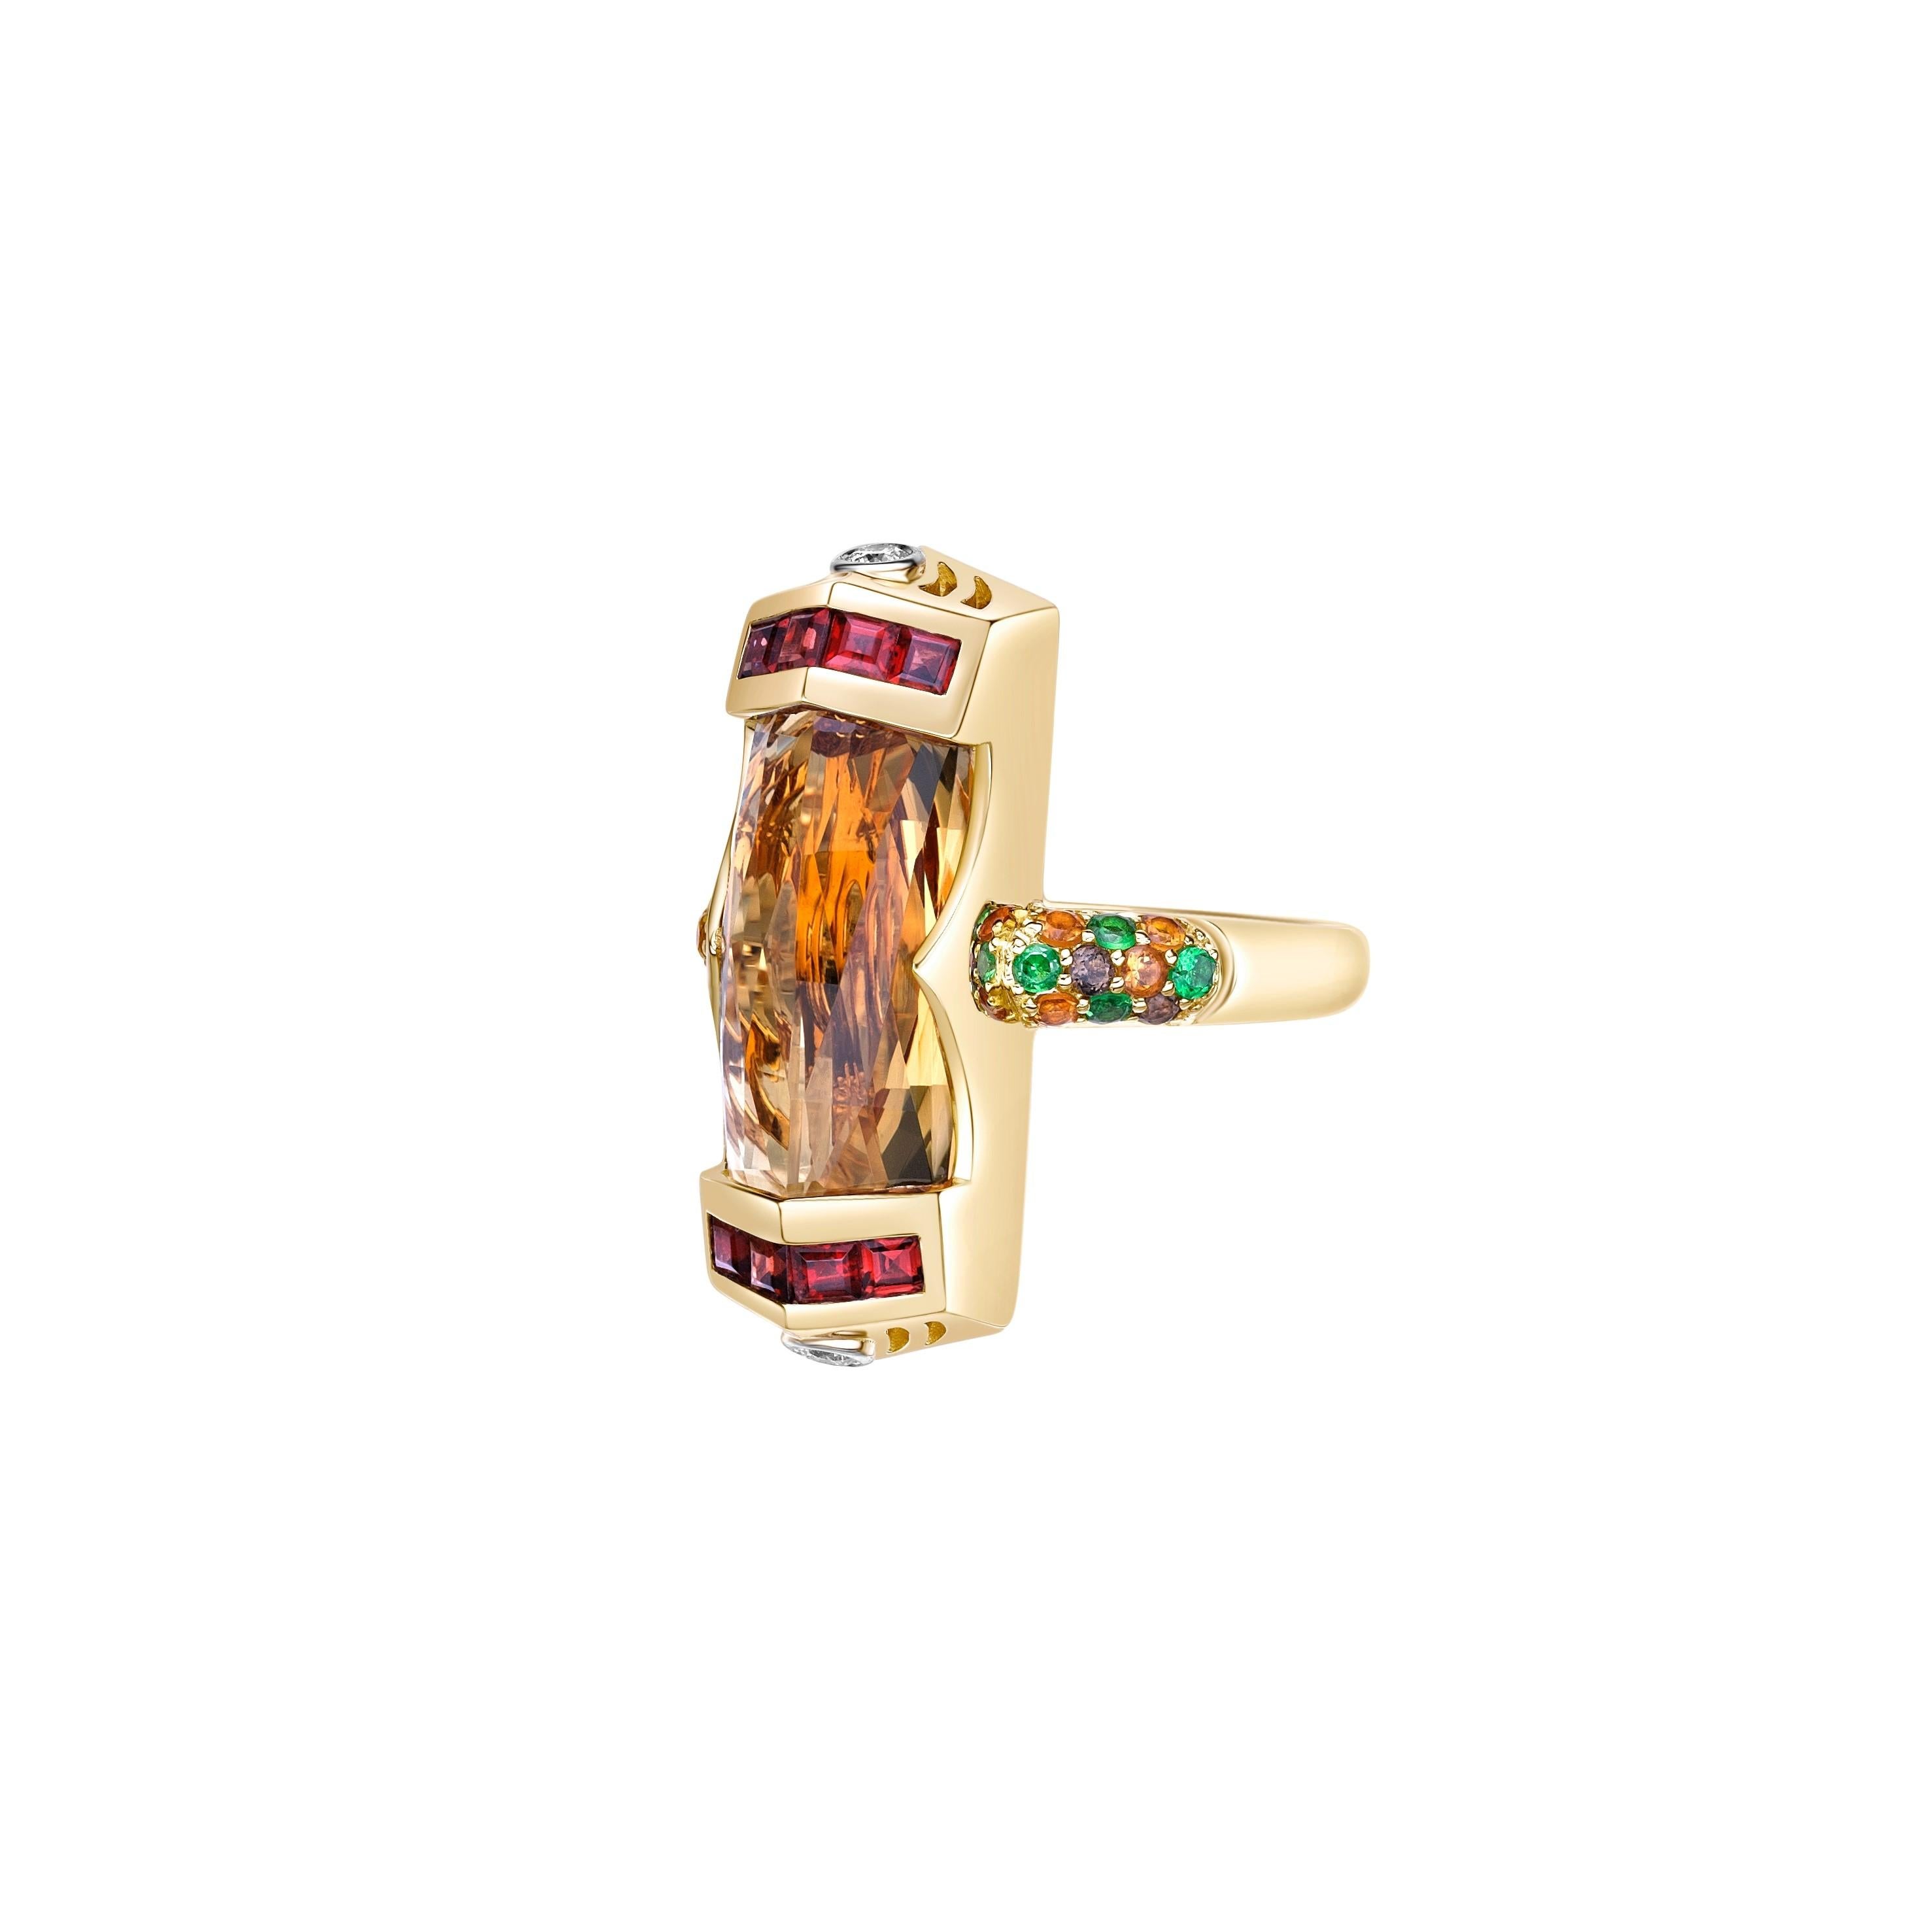 Baguette Cut 6.67 Carat Honey Quartz Cocktail Ring in 18KYG with Multi Gemstone and Diamond. For Sale